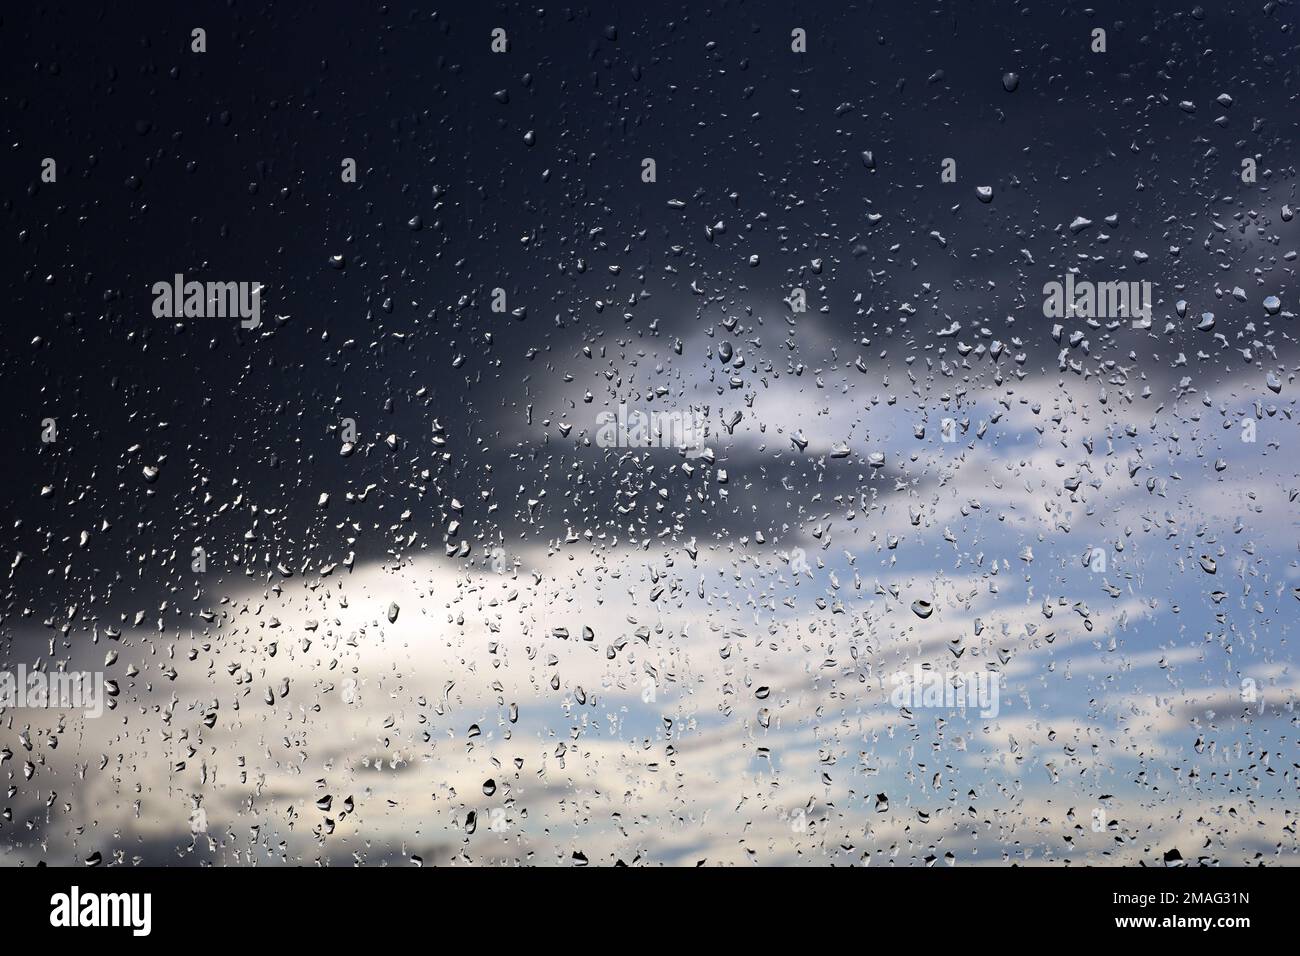 Raindrops on window glass on blurred background of sky with storm clouds. Beautiful water drops, weather during rain Stock Photo